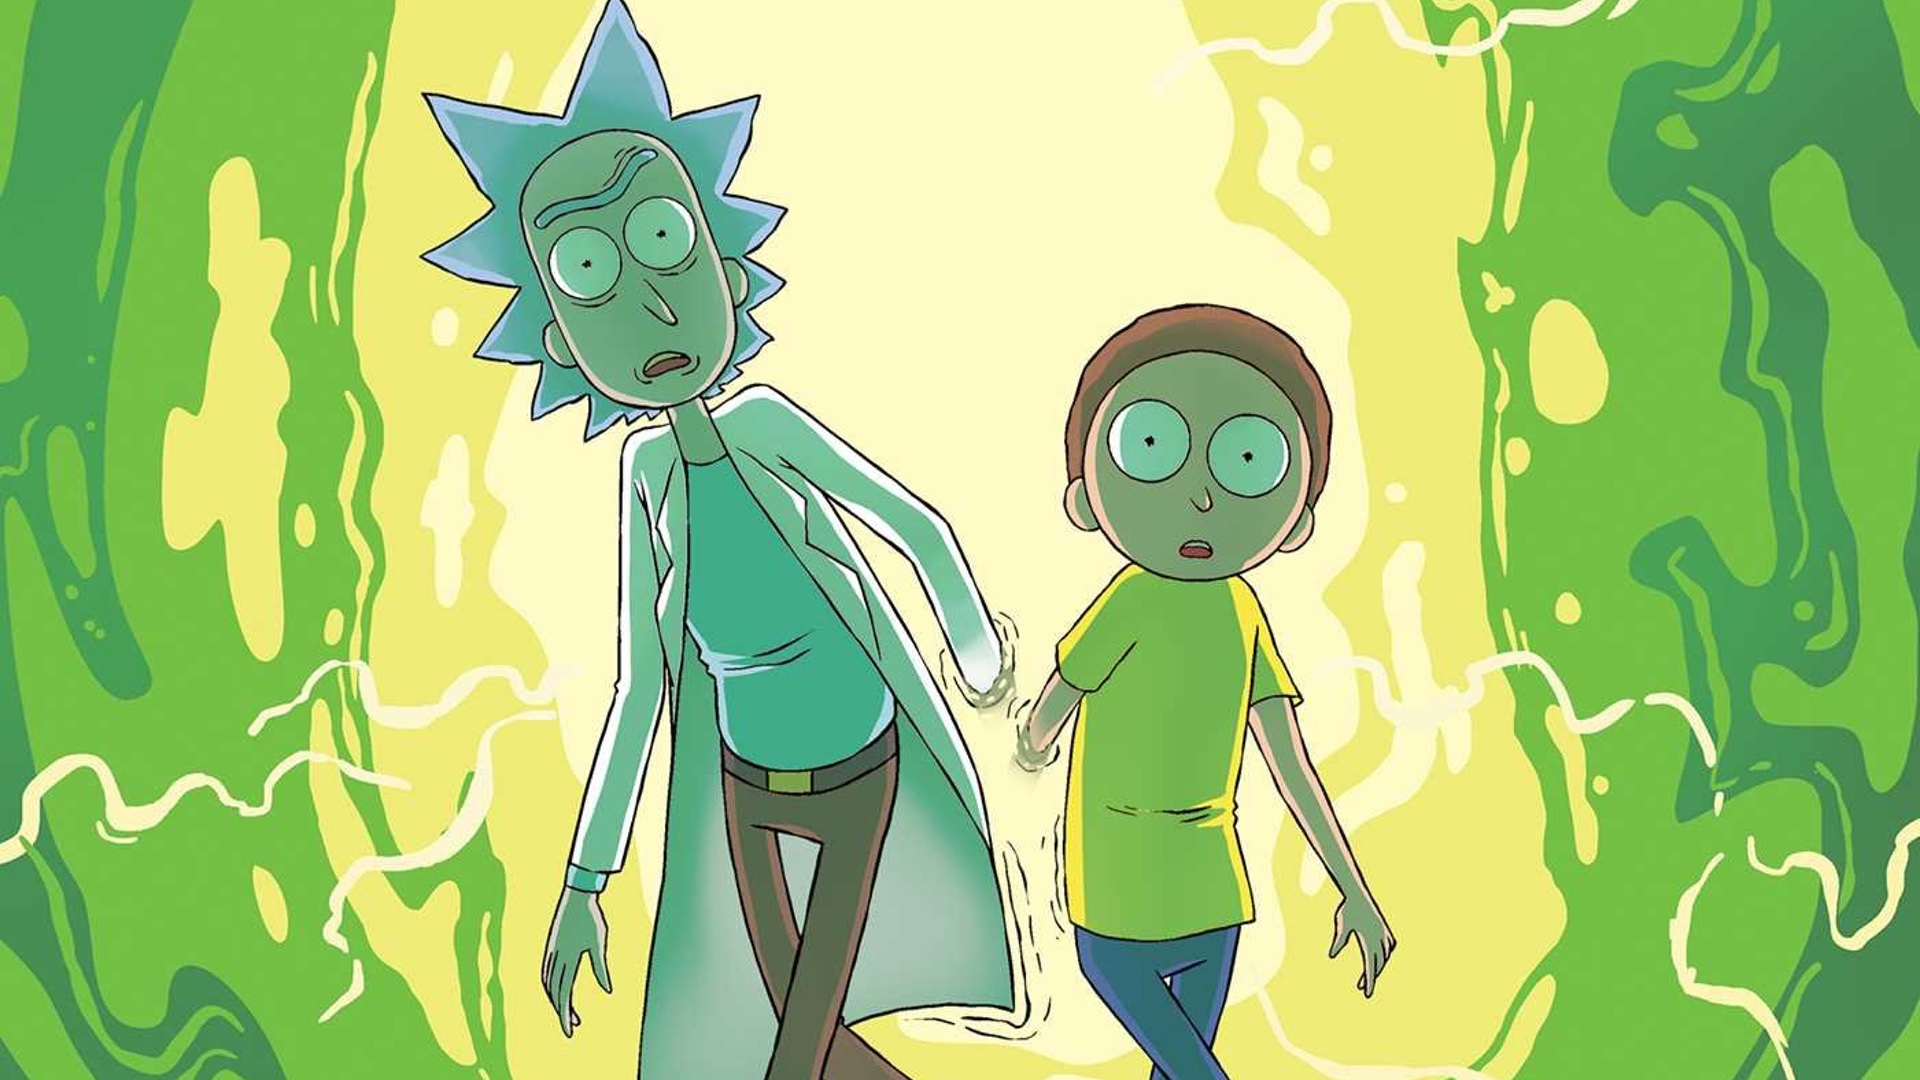 Fans are Waiting for Next Episode of Rick and Morty